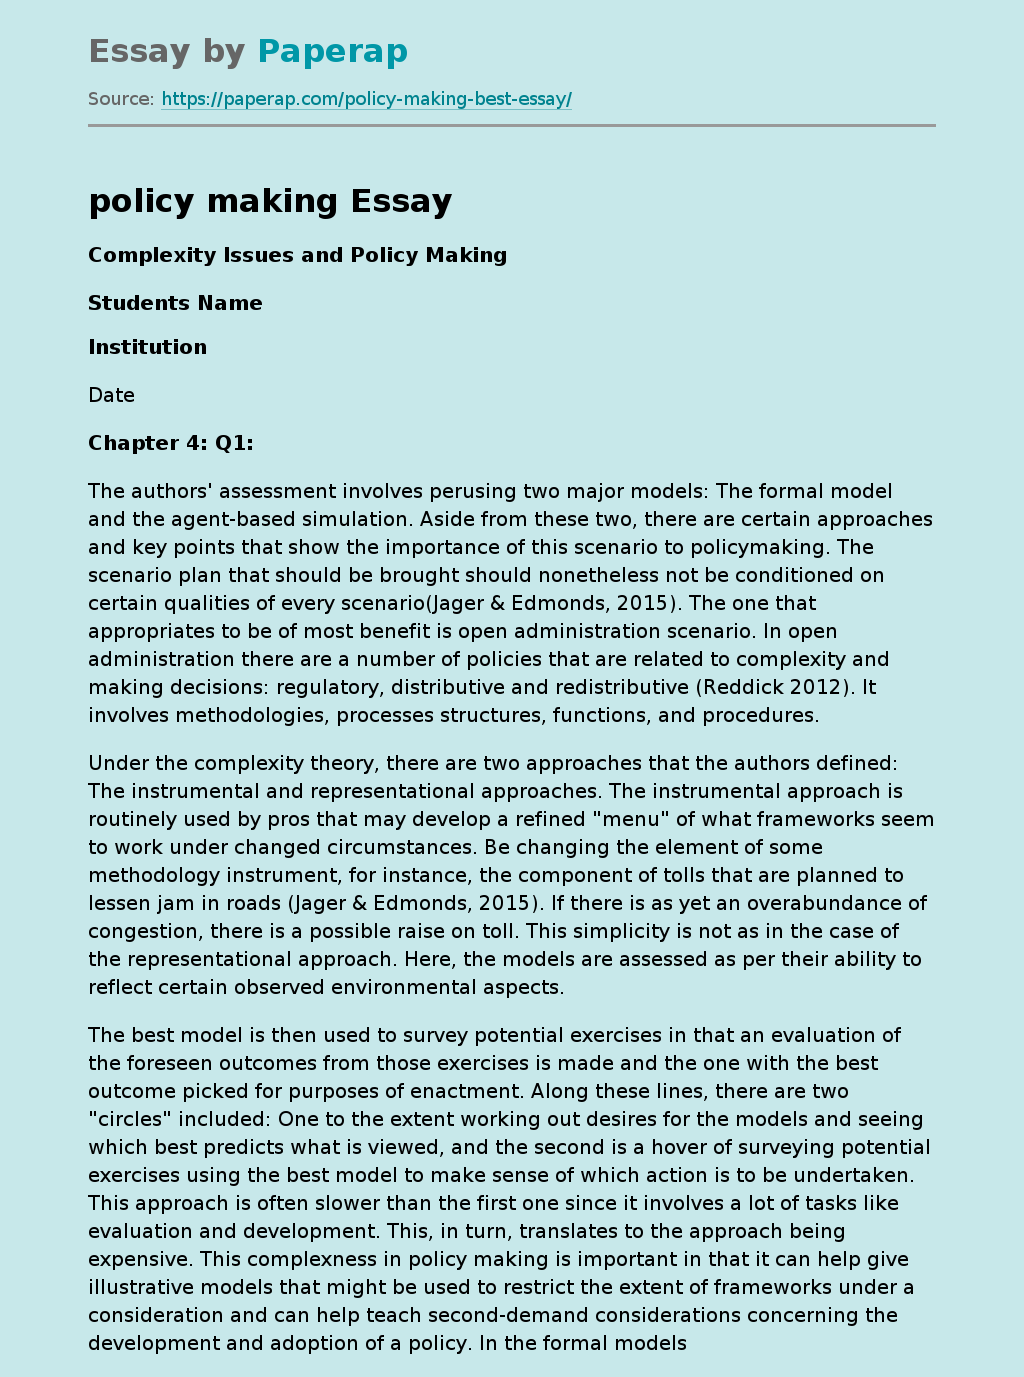 Complexity Issues and Policy Making